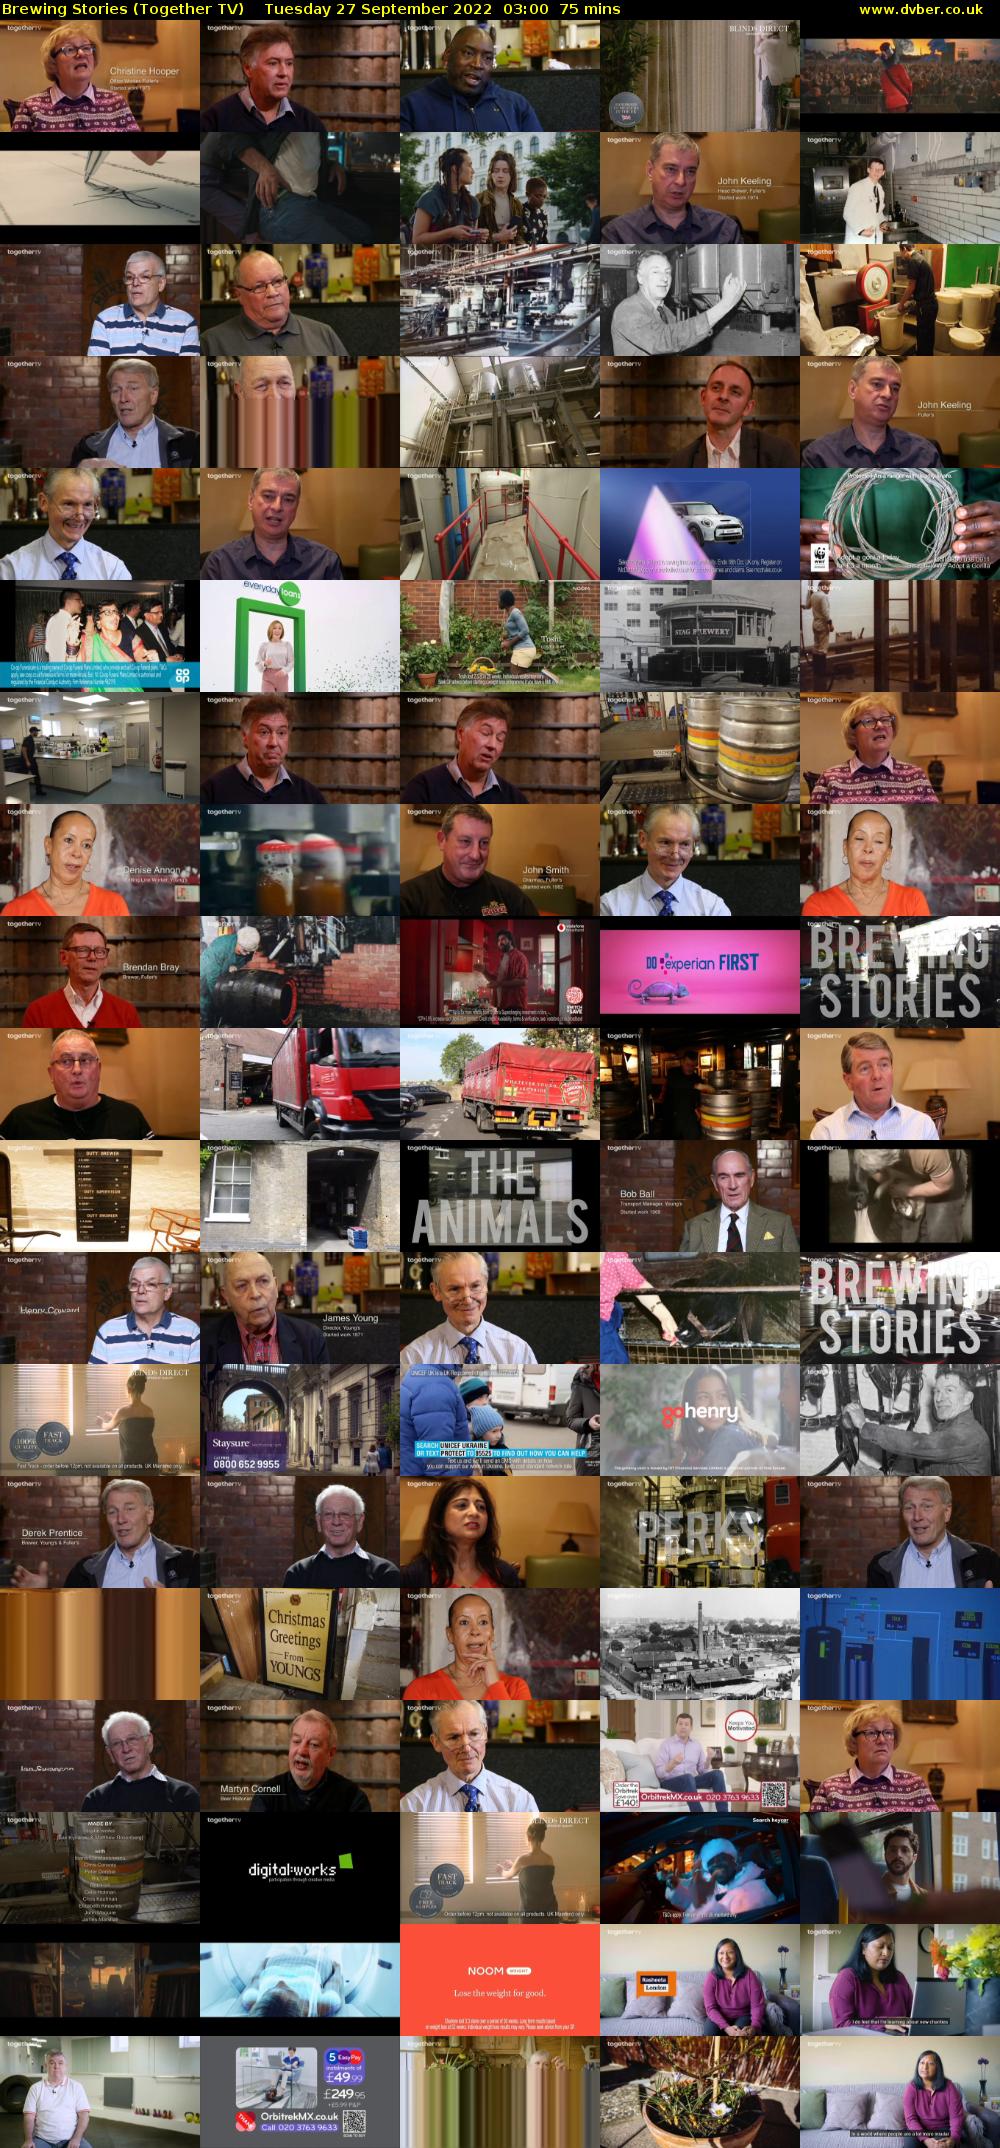 Brewing Stories (Together TV) Tuesday 27 September 2022 03:00 - 04:15